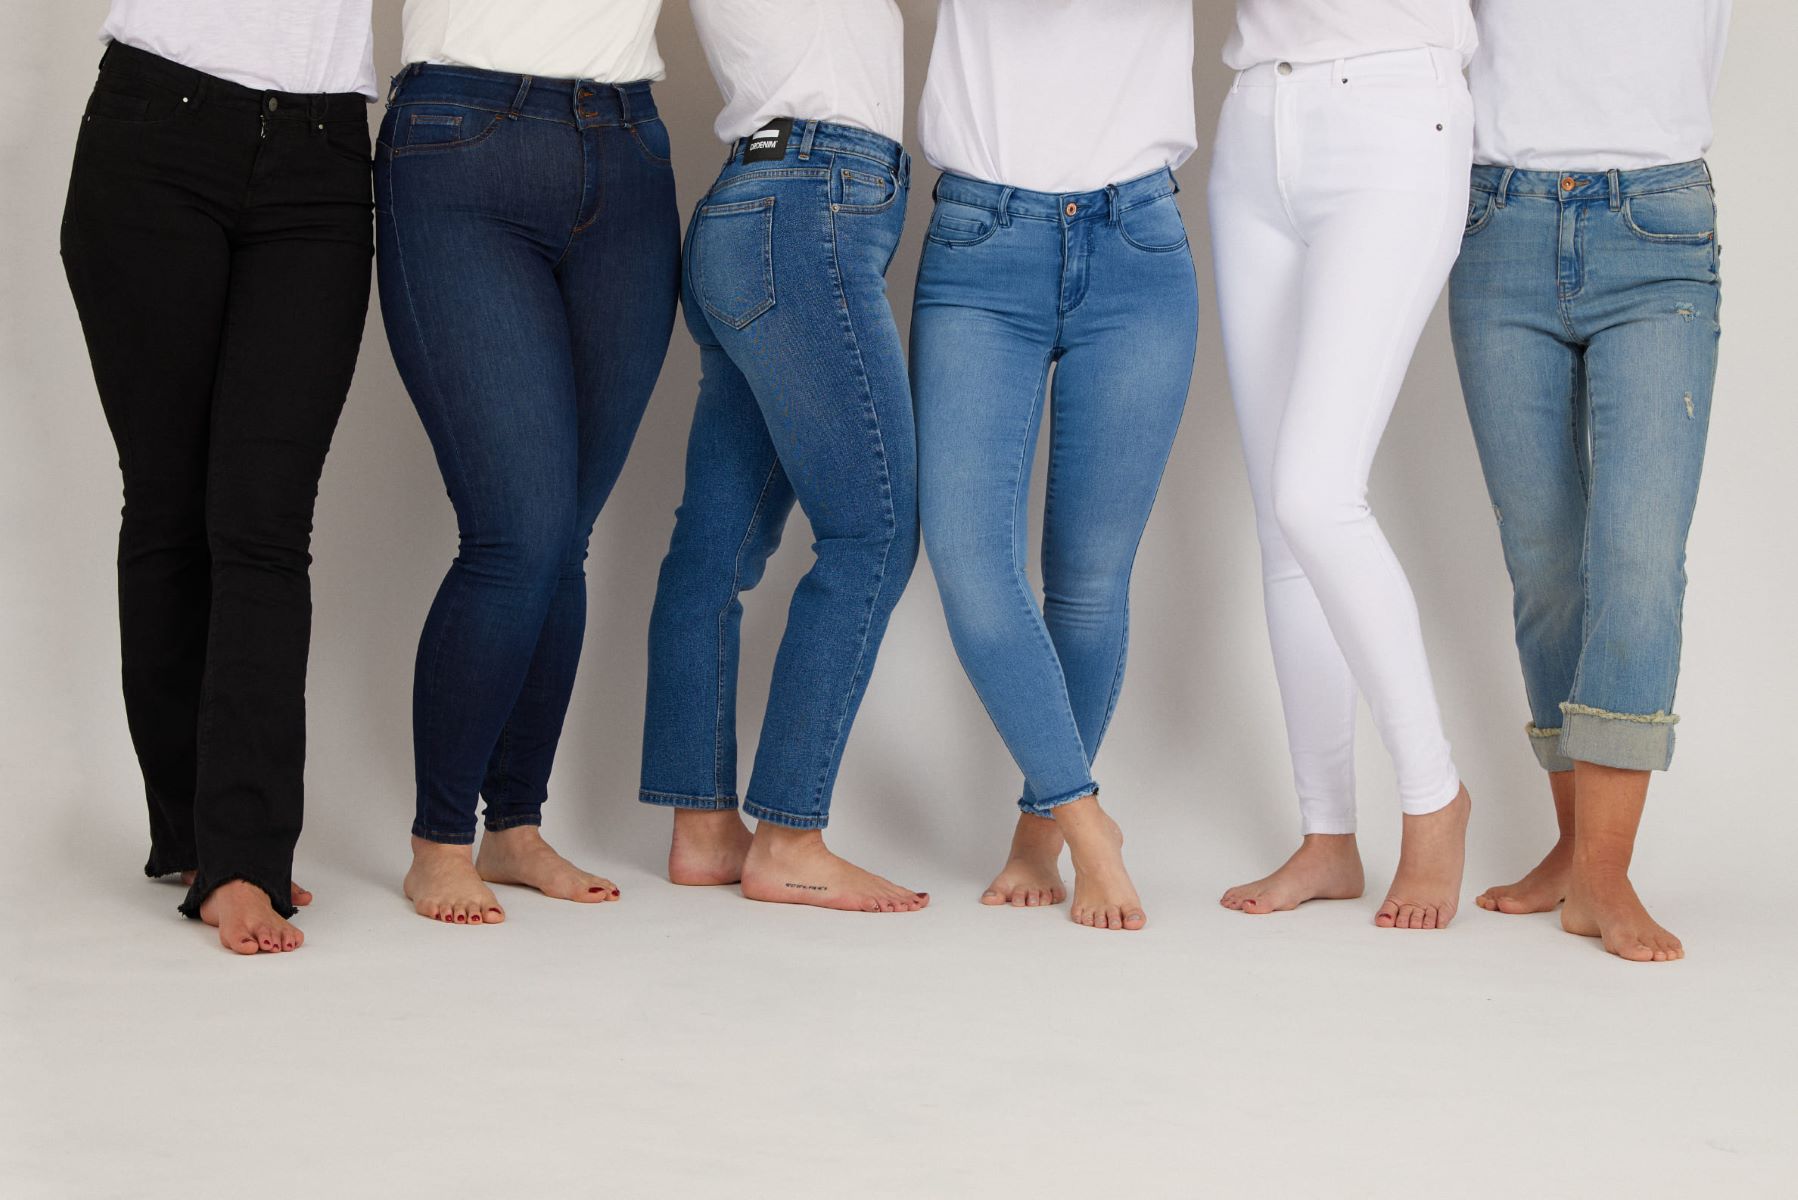 The Perfect Skinny Jeans For Every Body Type!